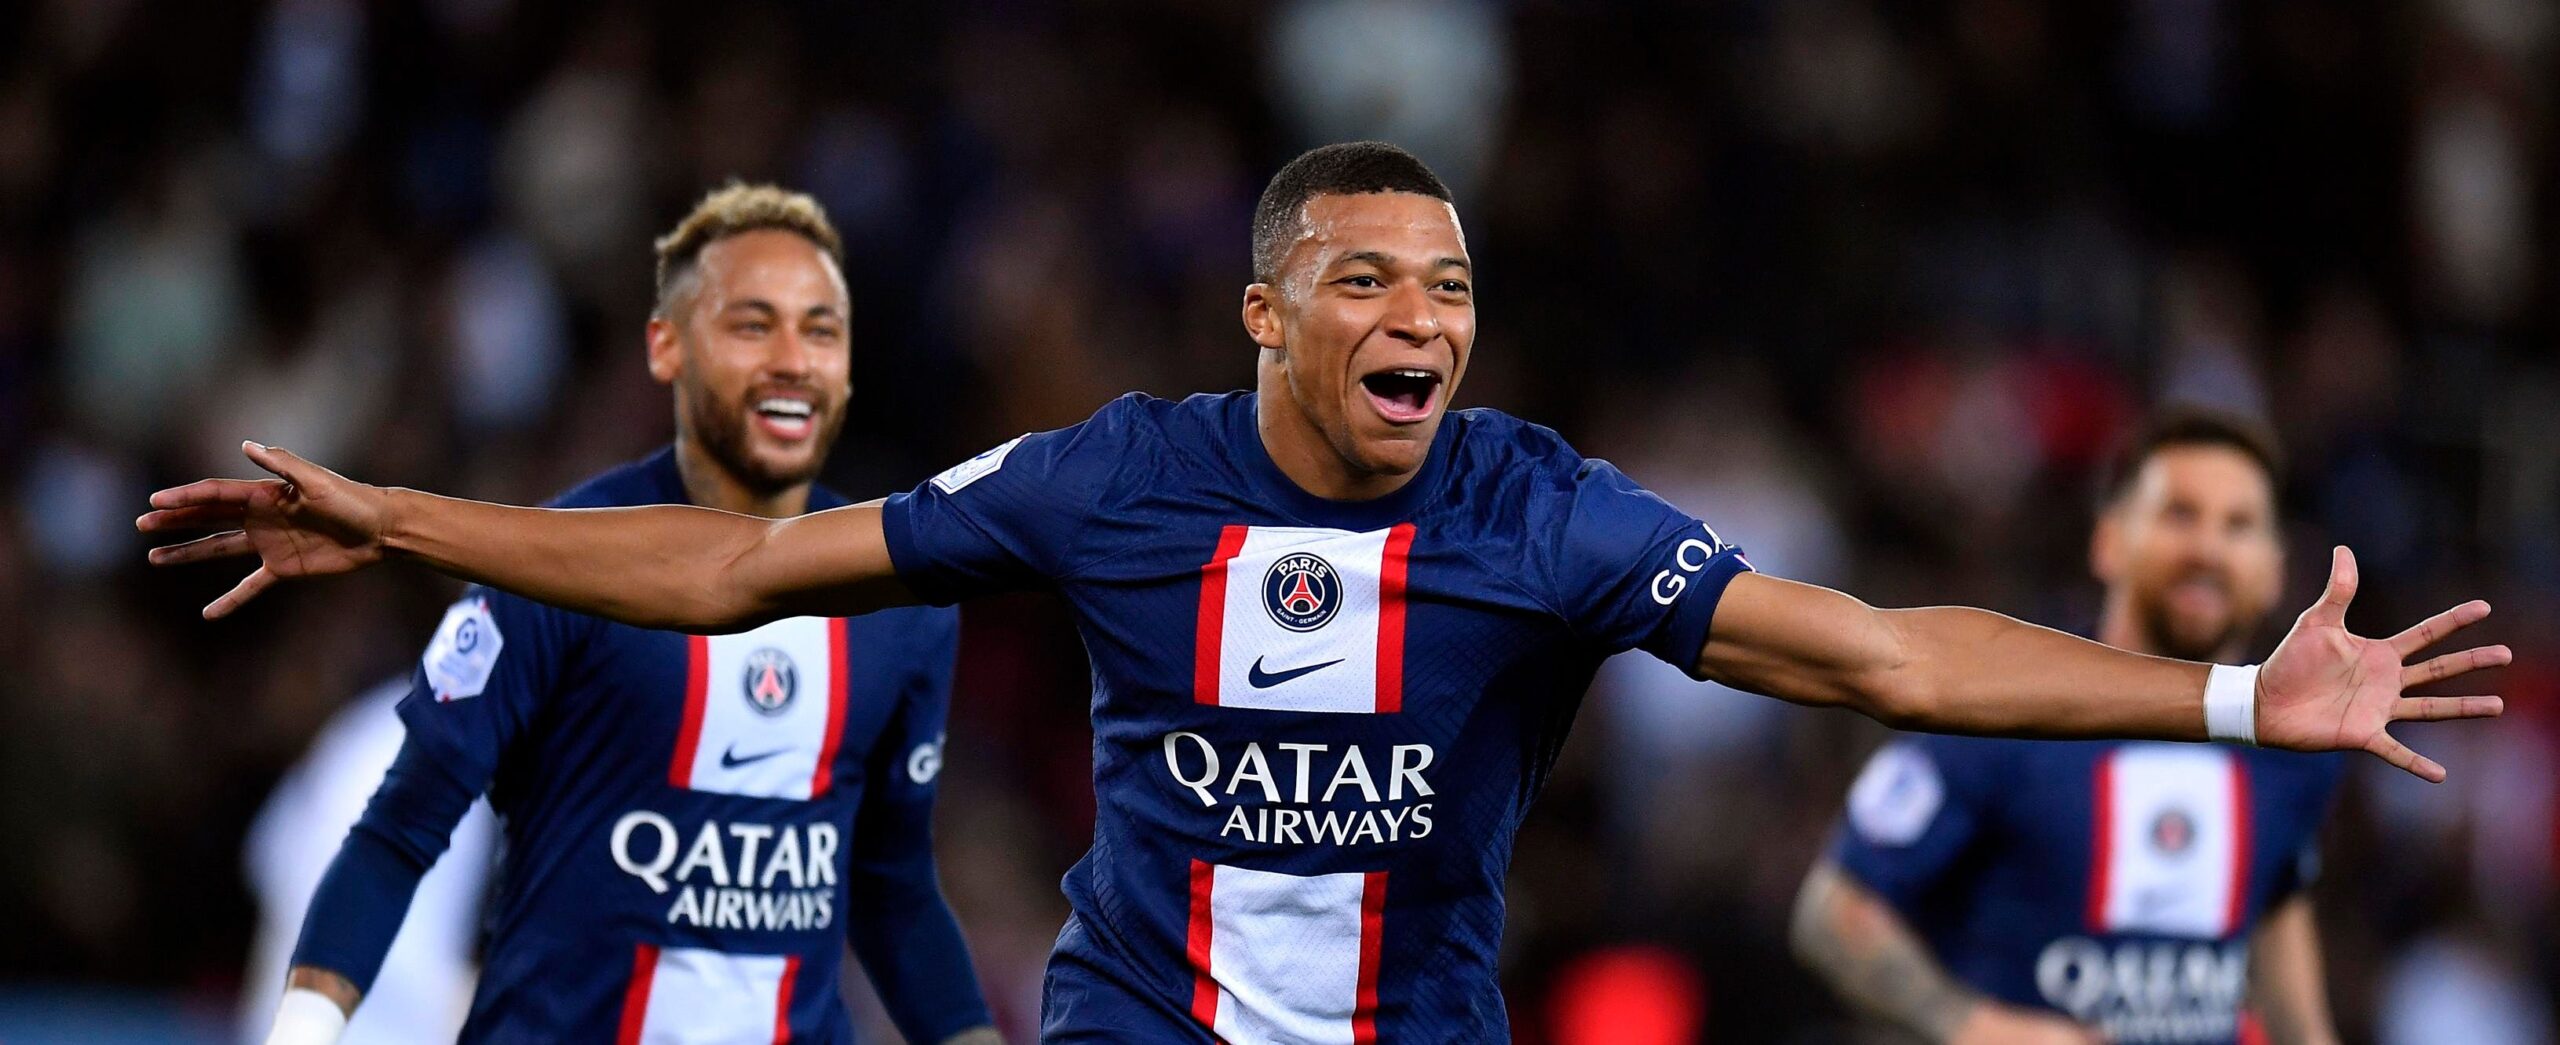 World’s highest paid footballers 2022: Kylian Mbappé claims No. 1 as Erling Haaland debuts